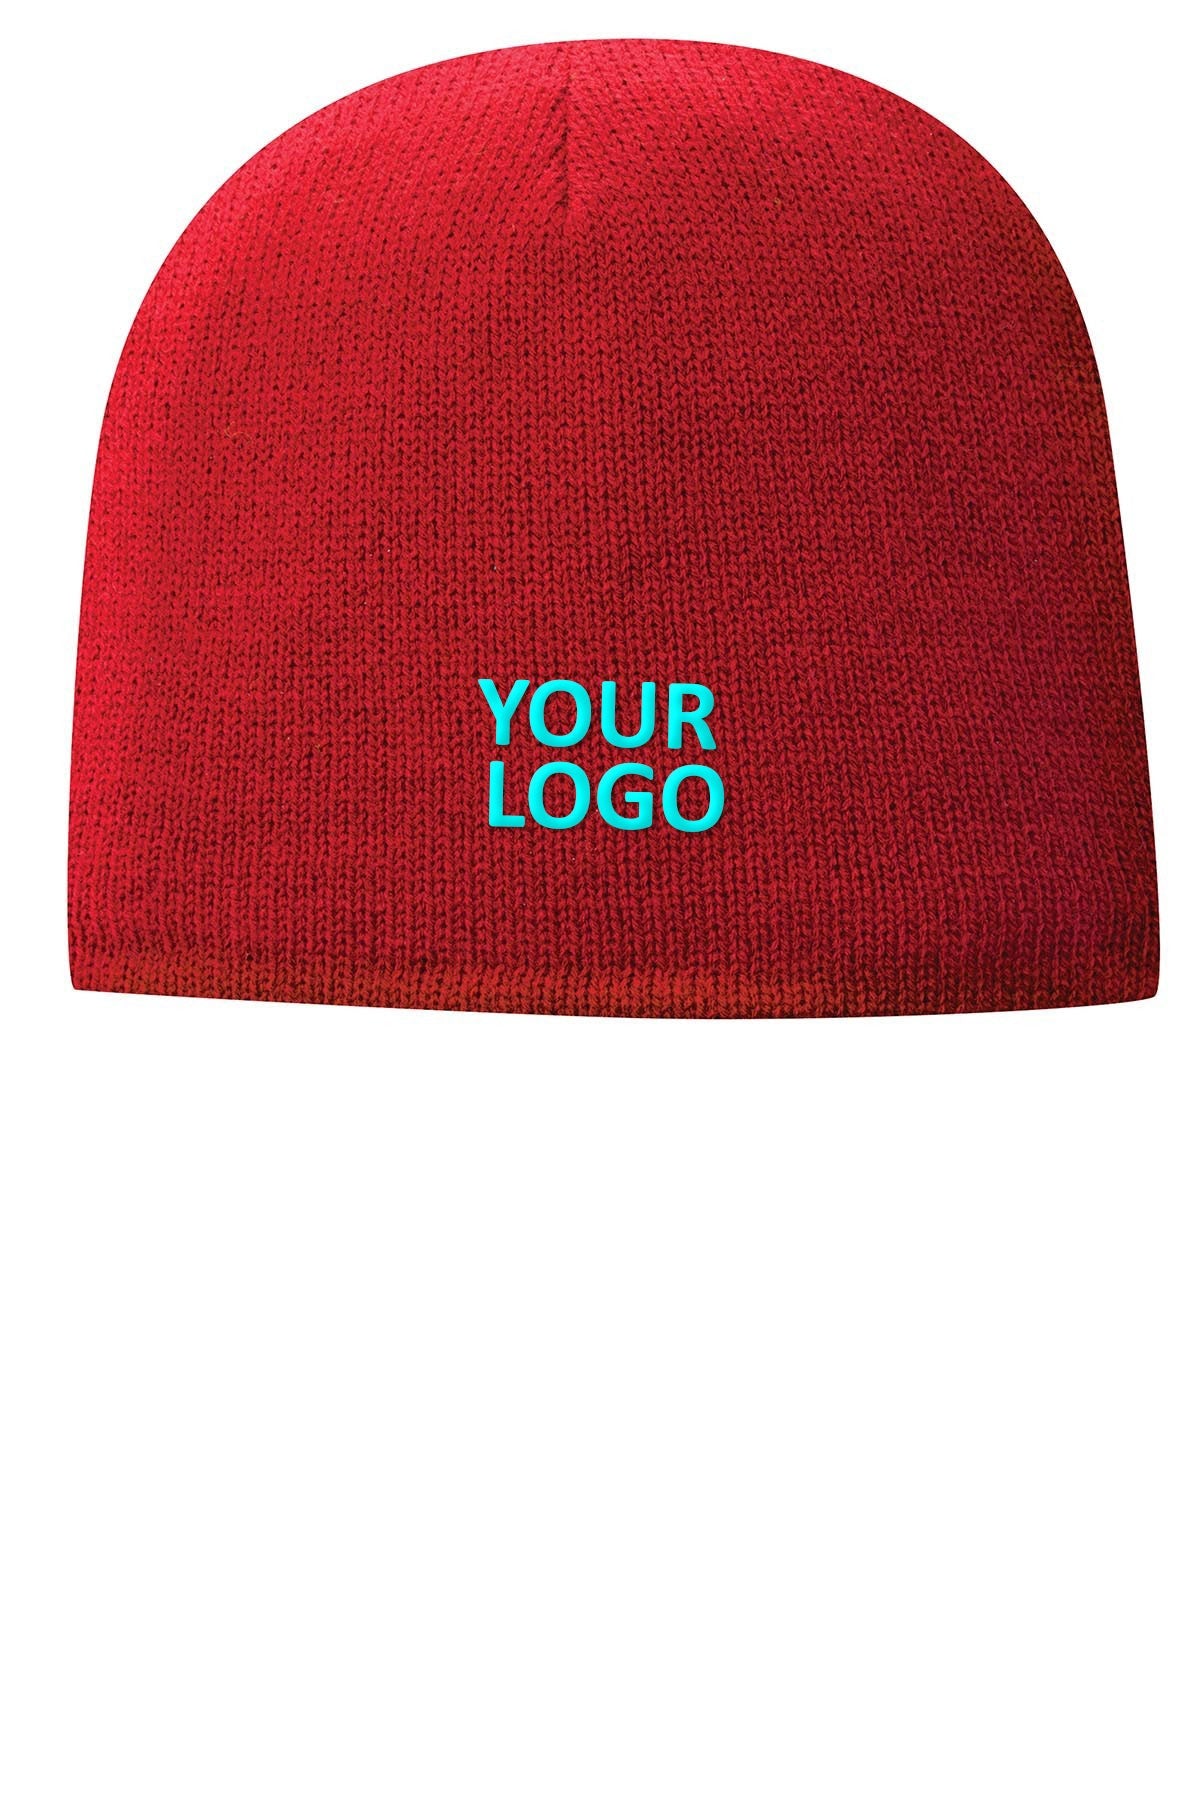 Port & Company Fleece Lined Customized Beanies, Red